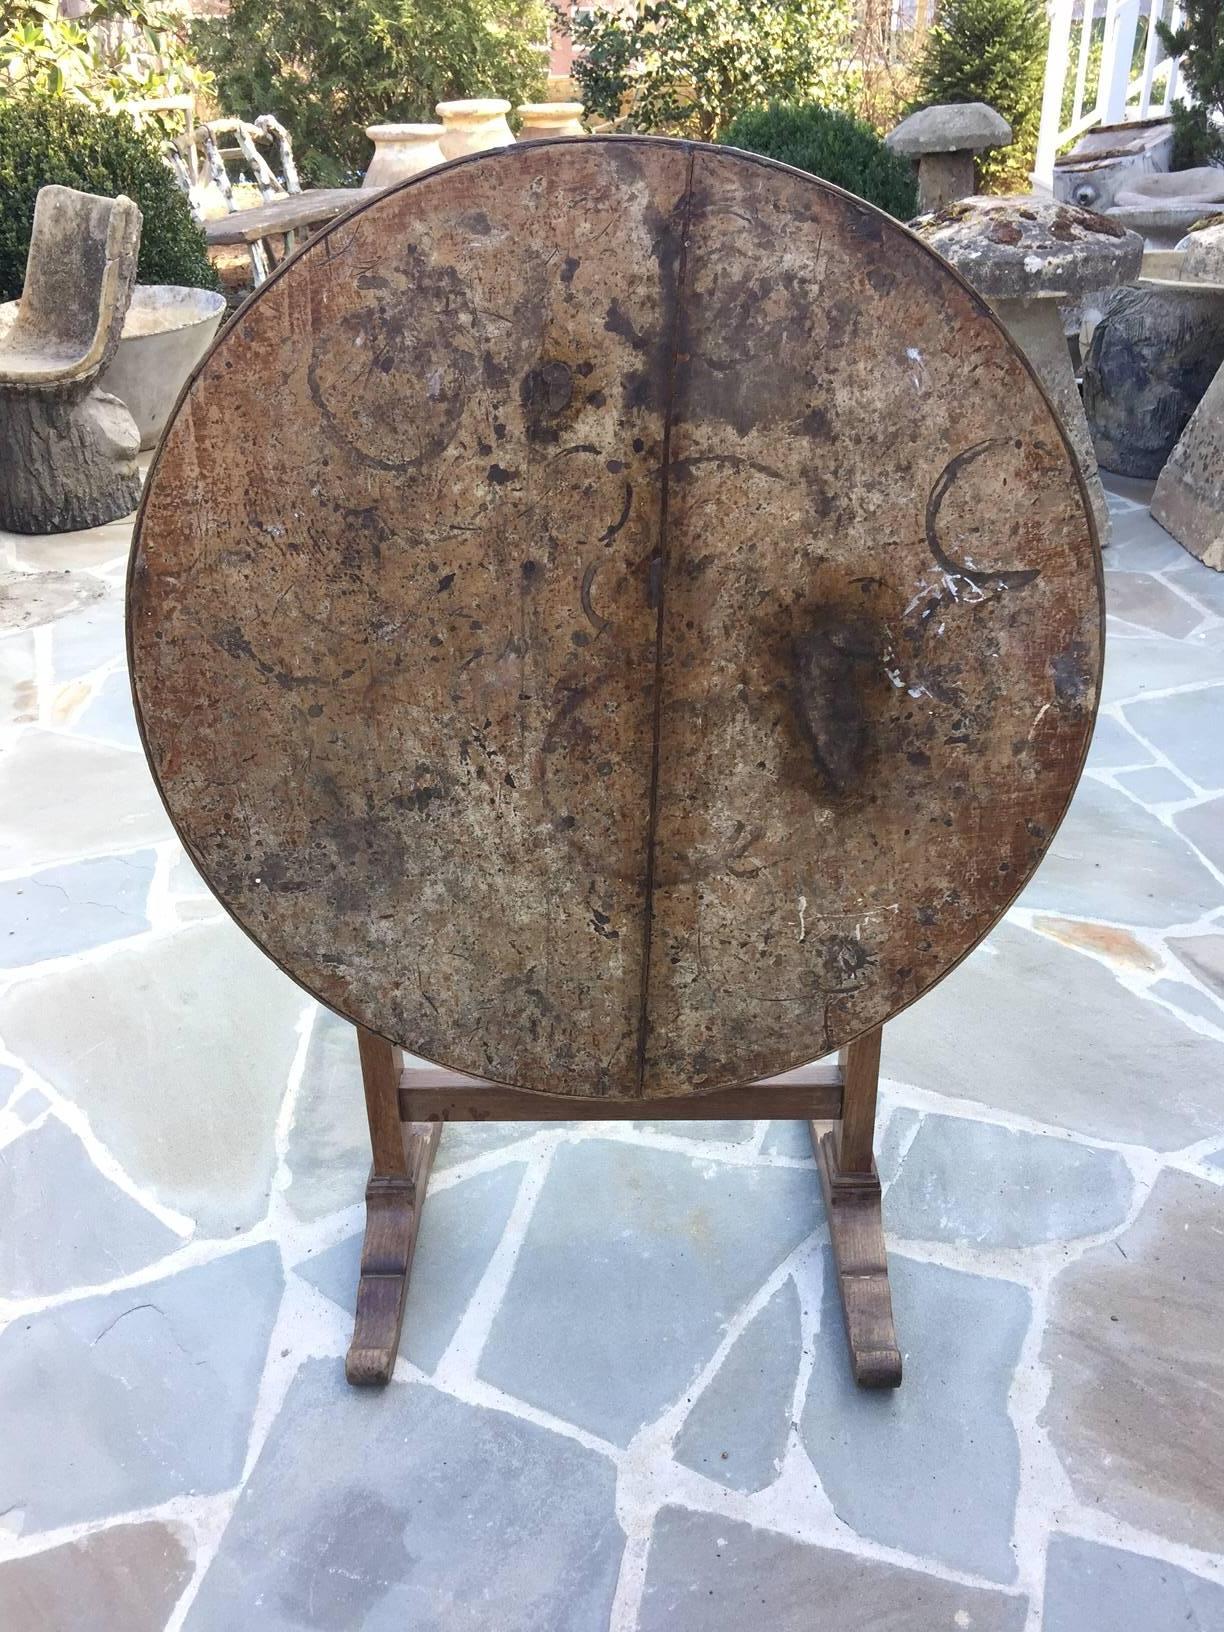 19th century French oak wine tasting tilt-top table. The fabulous unique patina comes from over a century of use. Truly a character piece.